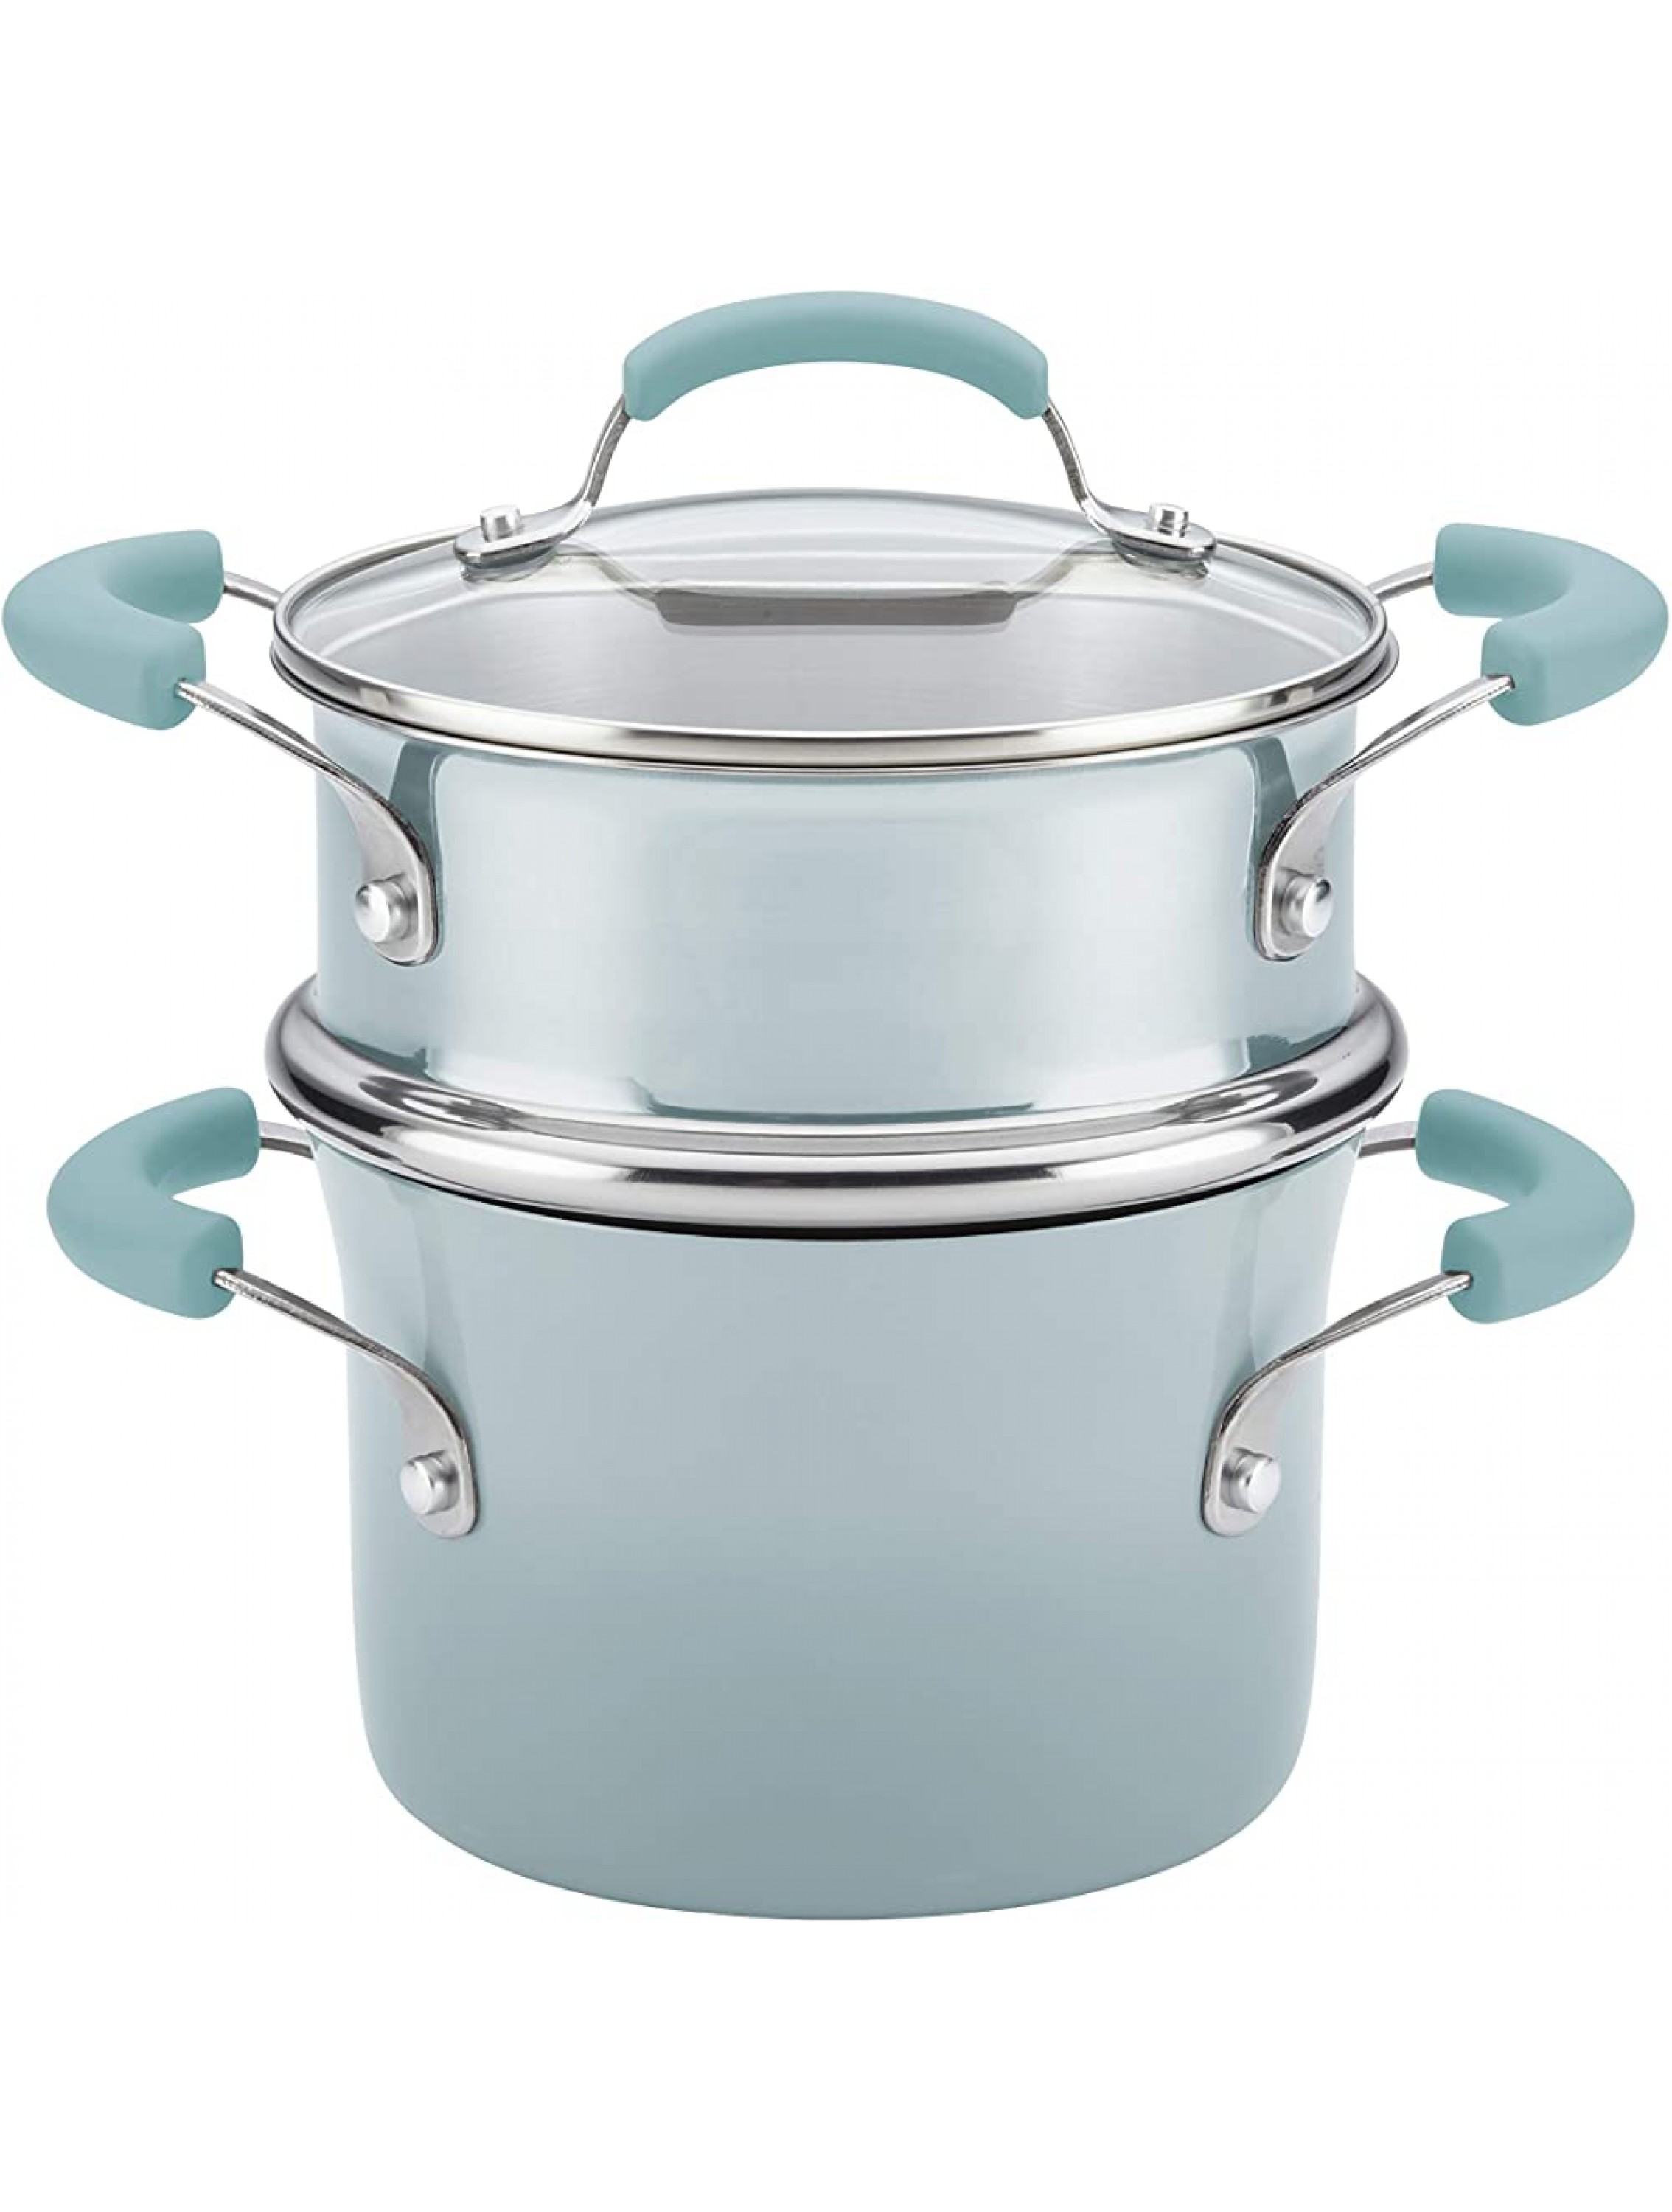 Rachael Ray Classic Brights Collection Porcelain II 3 Qt. Covered Saucepan with Steamer Insert Sky Blue - BFSSCGZJN